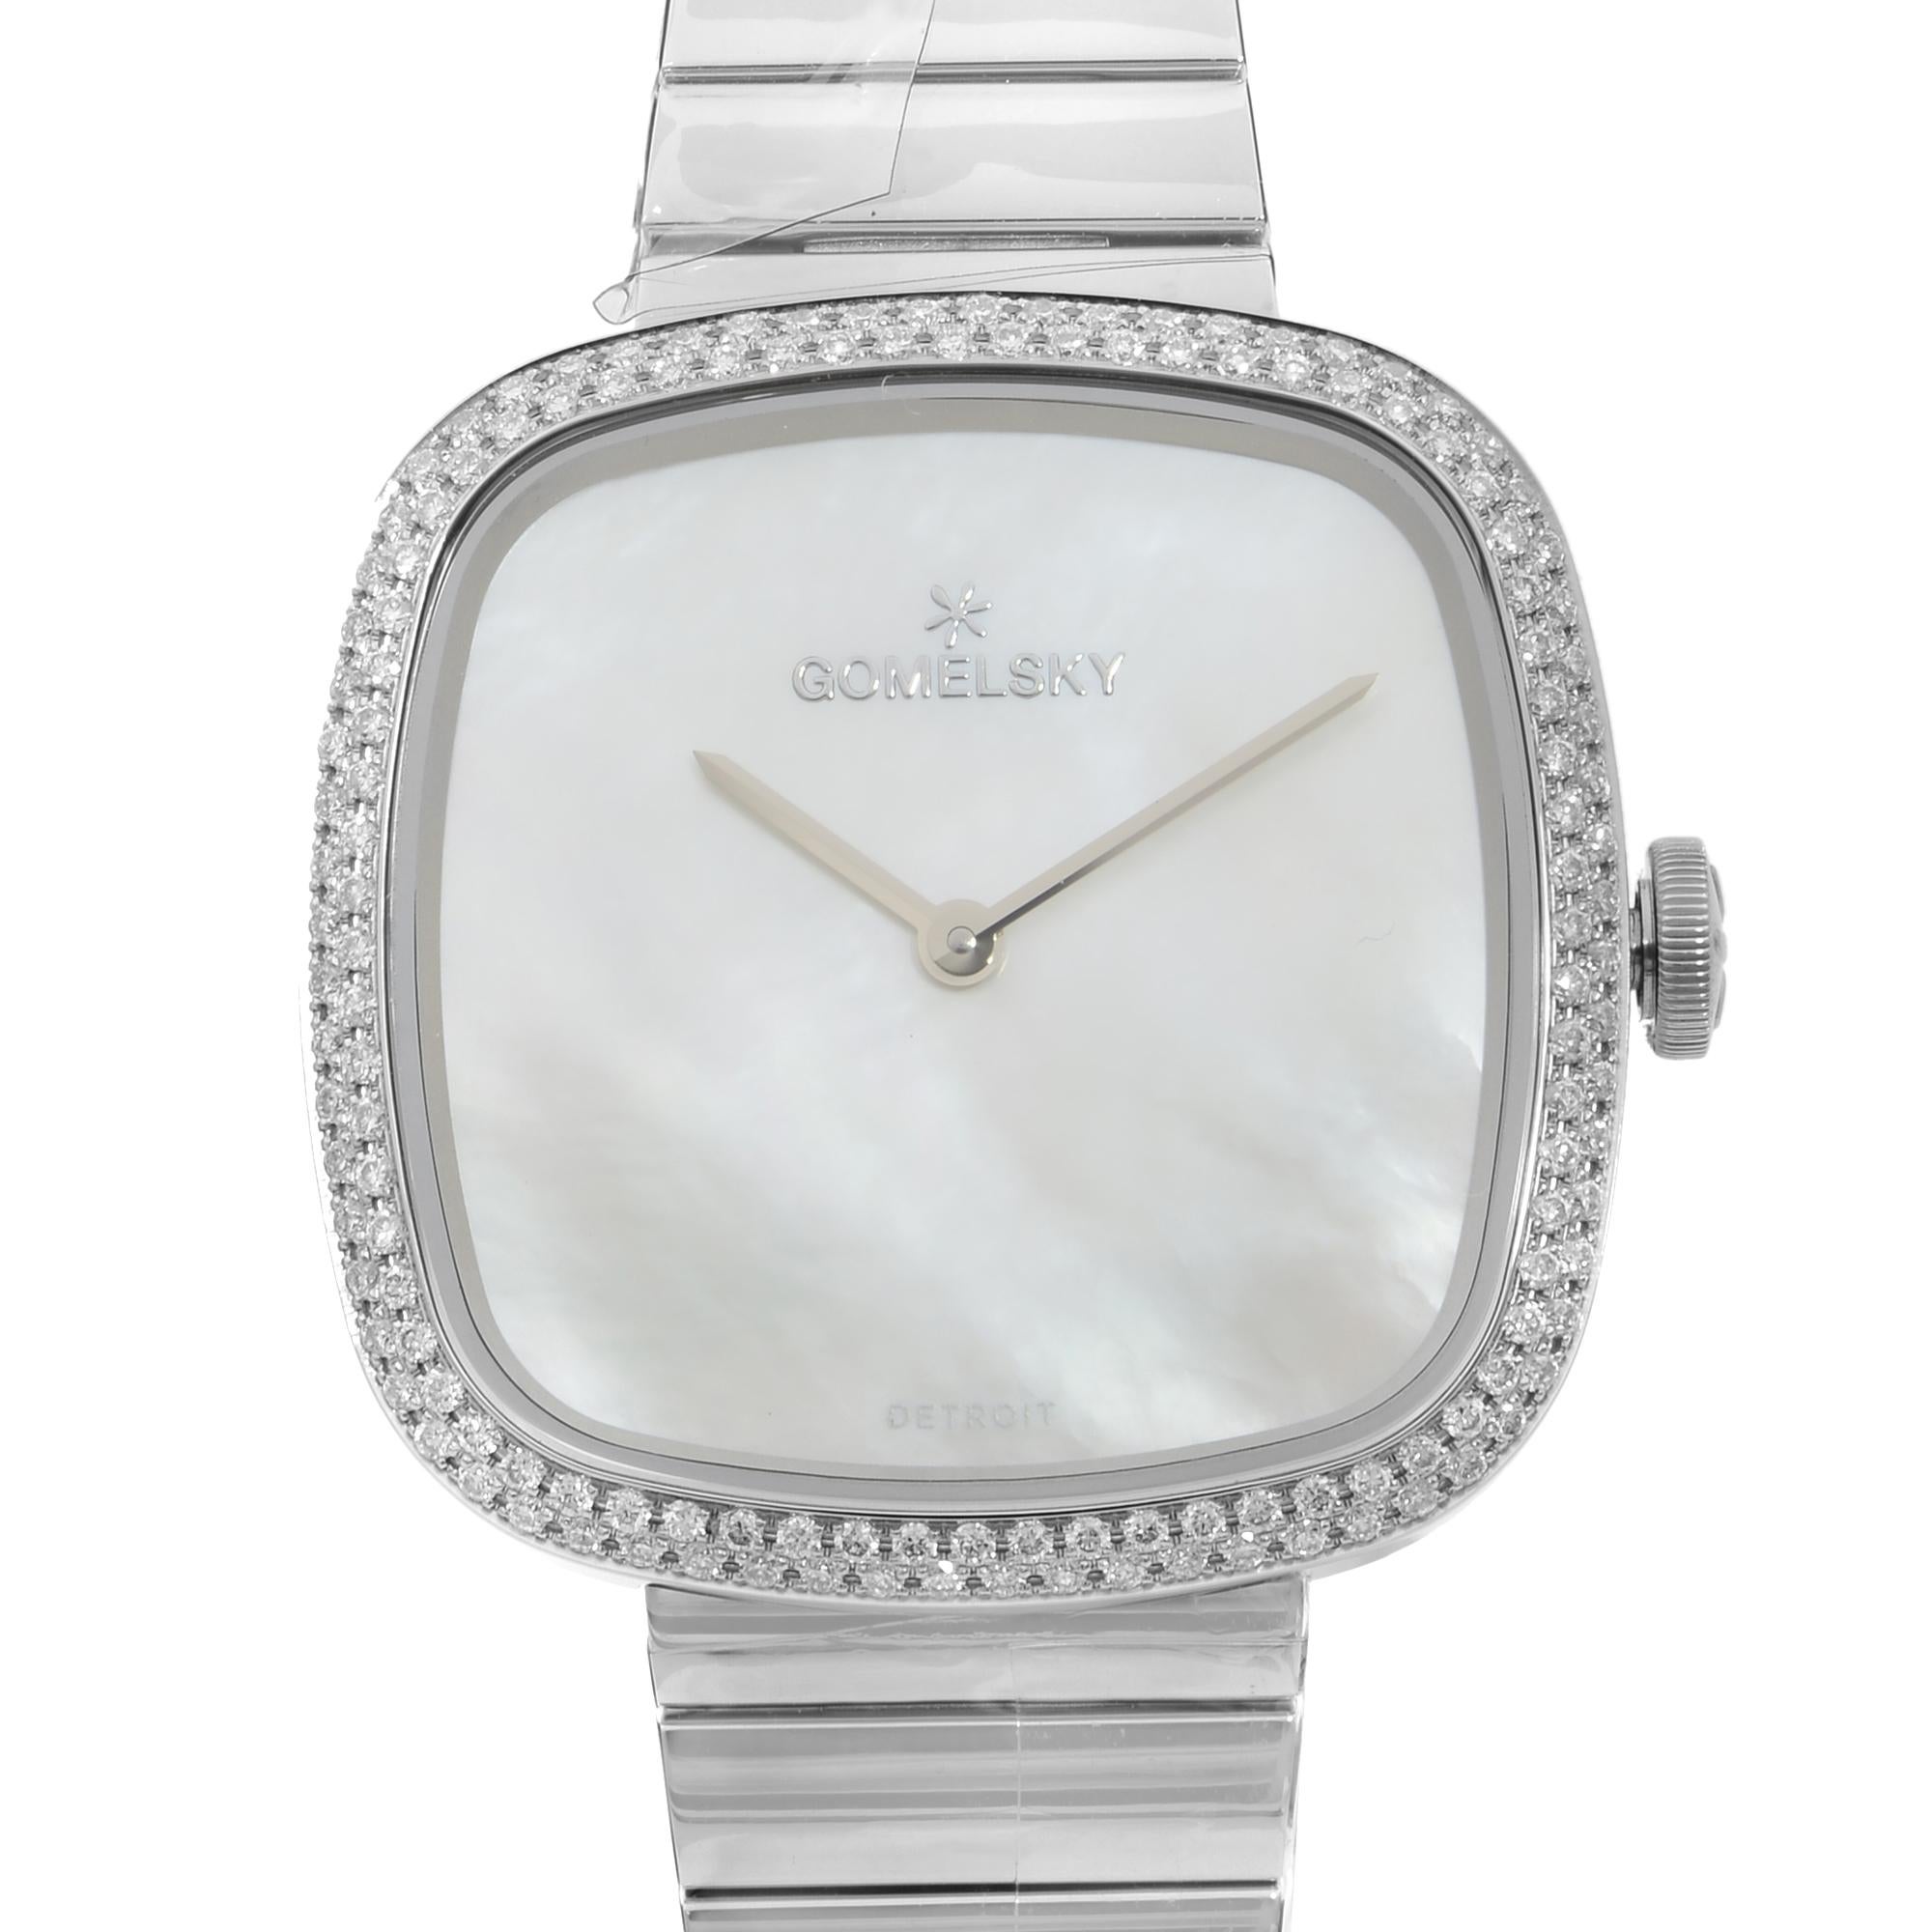 This brand new Gomelsky Eppie Sneed G0120095028 is a beautiful Ladie's timepiece that is powered by quartz (battery) movement which is cased in a stainless steel case. It has a  rectangle shape face,  dial, and has hand unspecified style markers. It